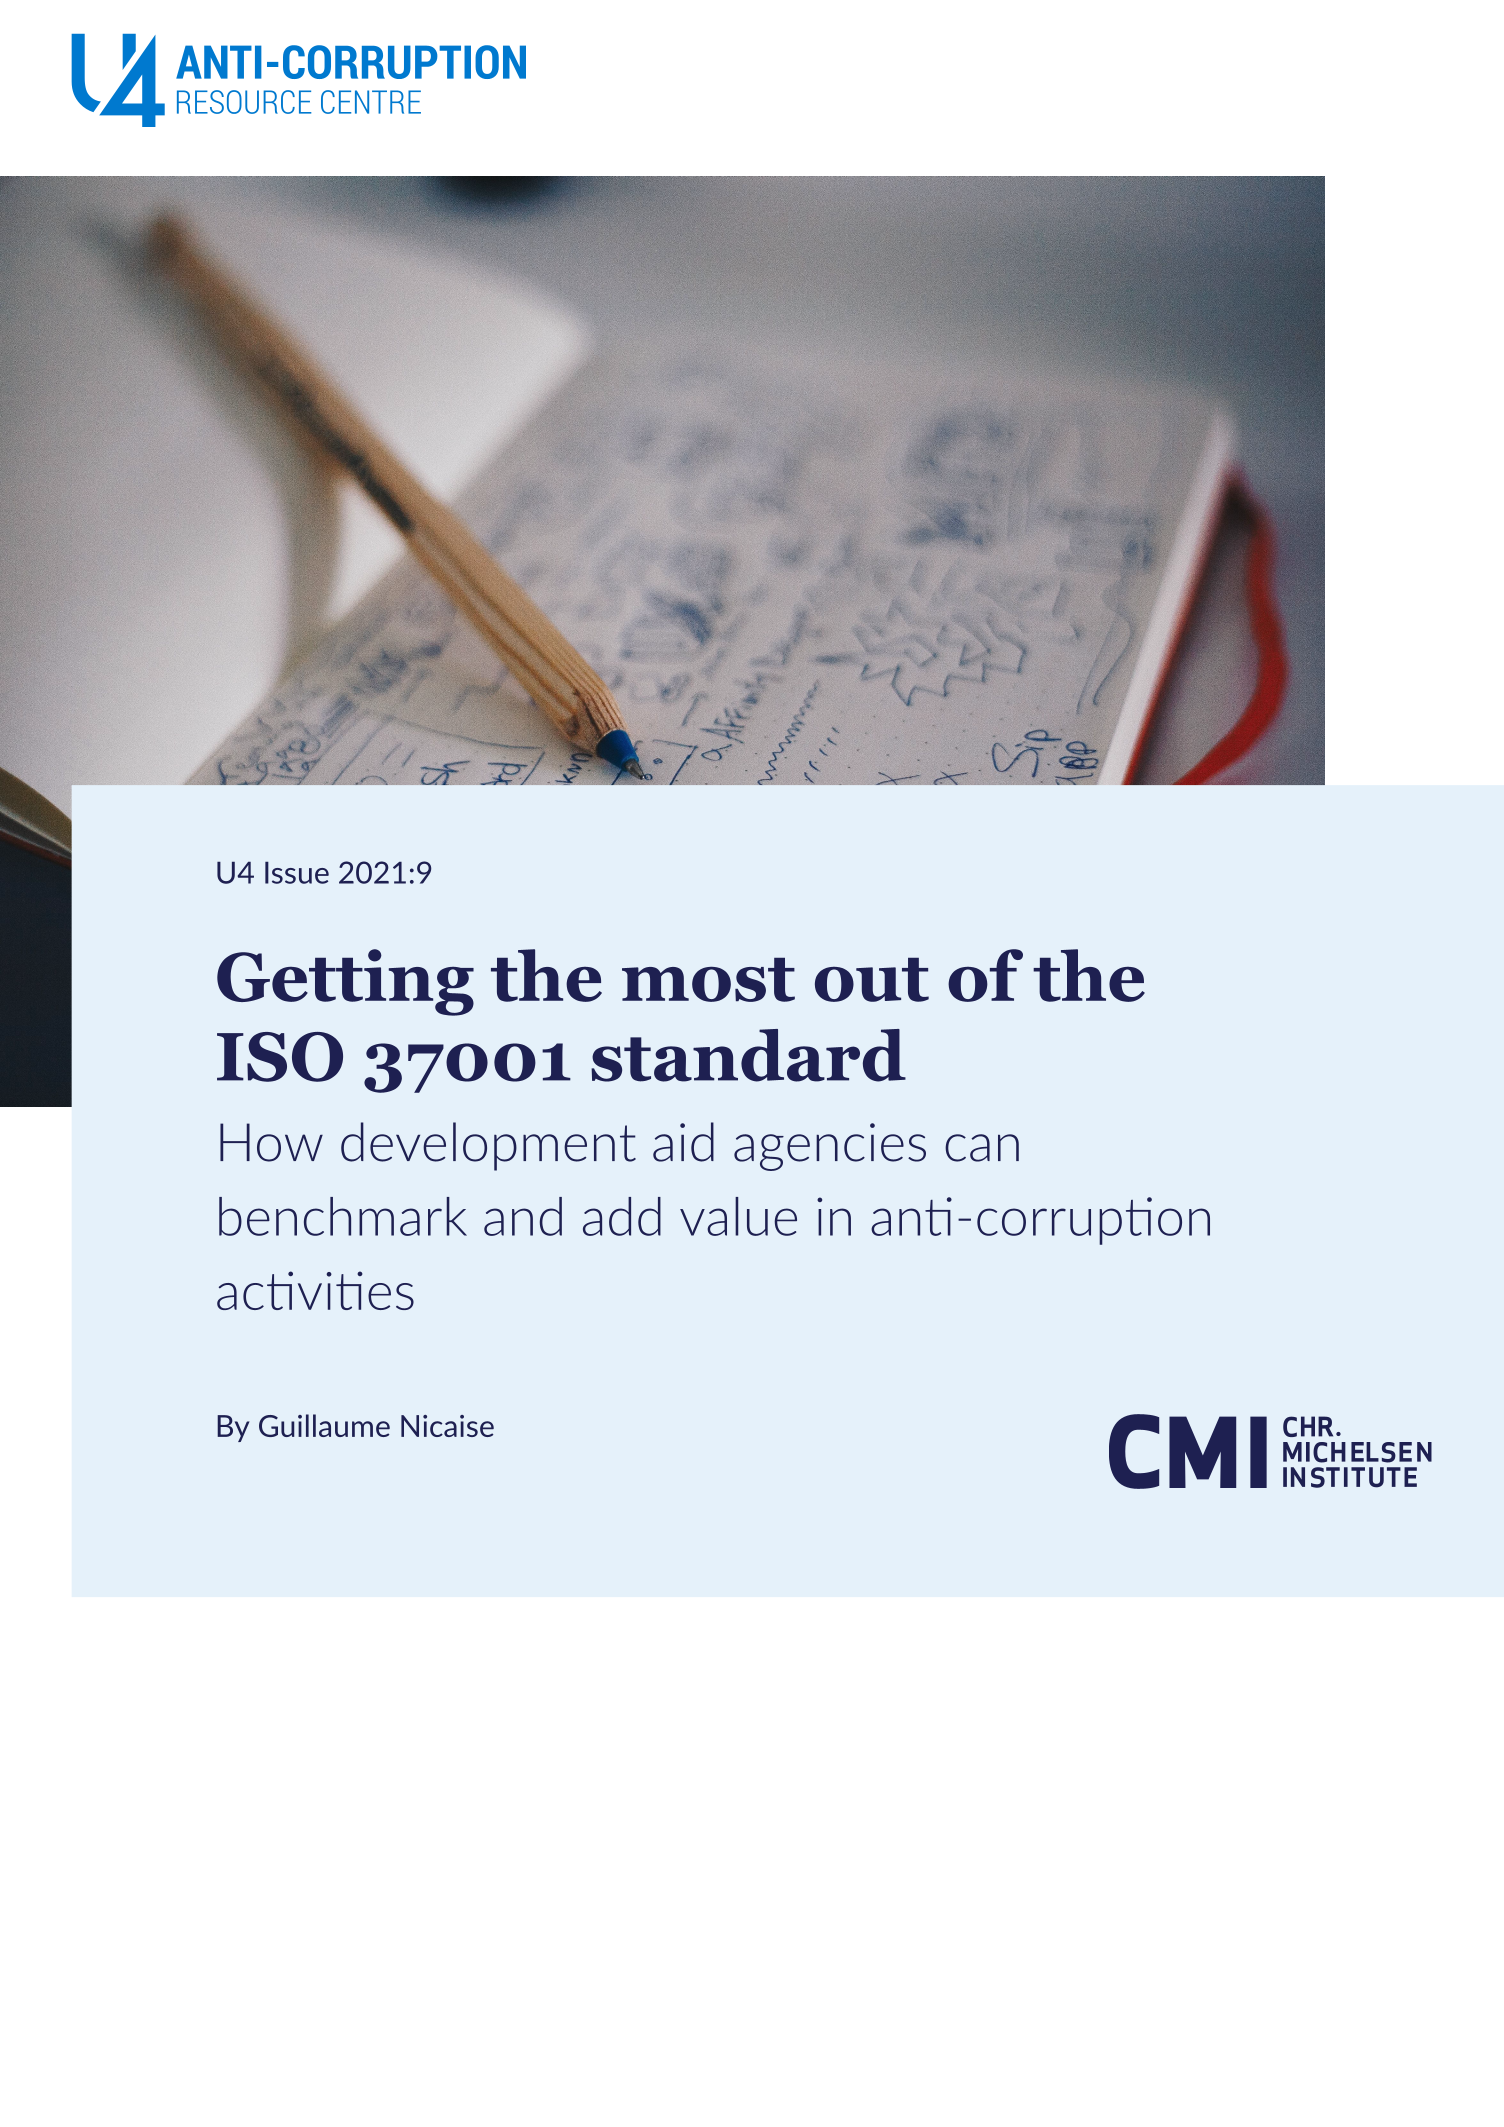 Getting the most out of the ISO 37001 standard